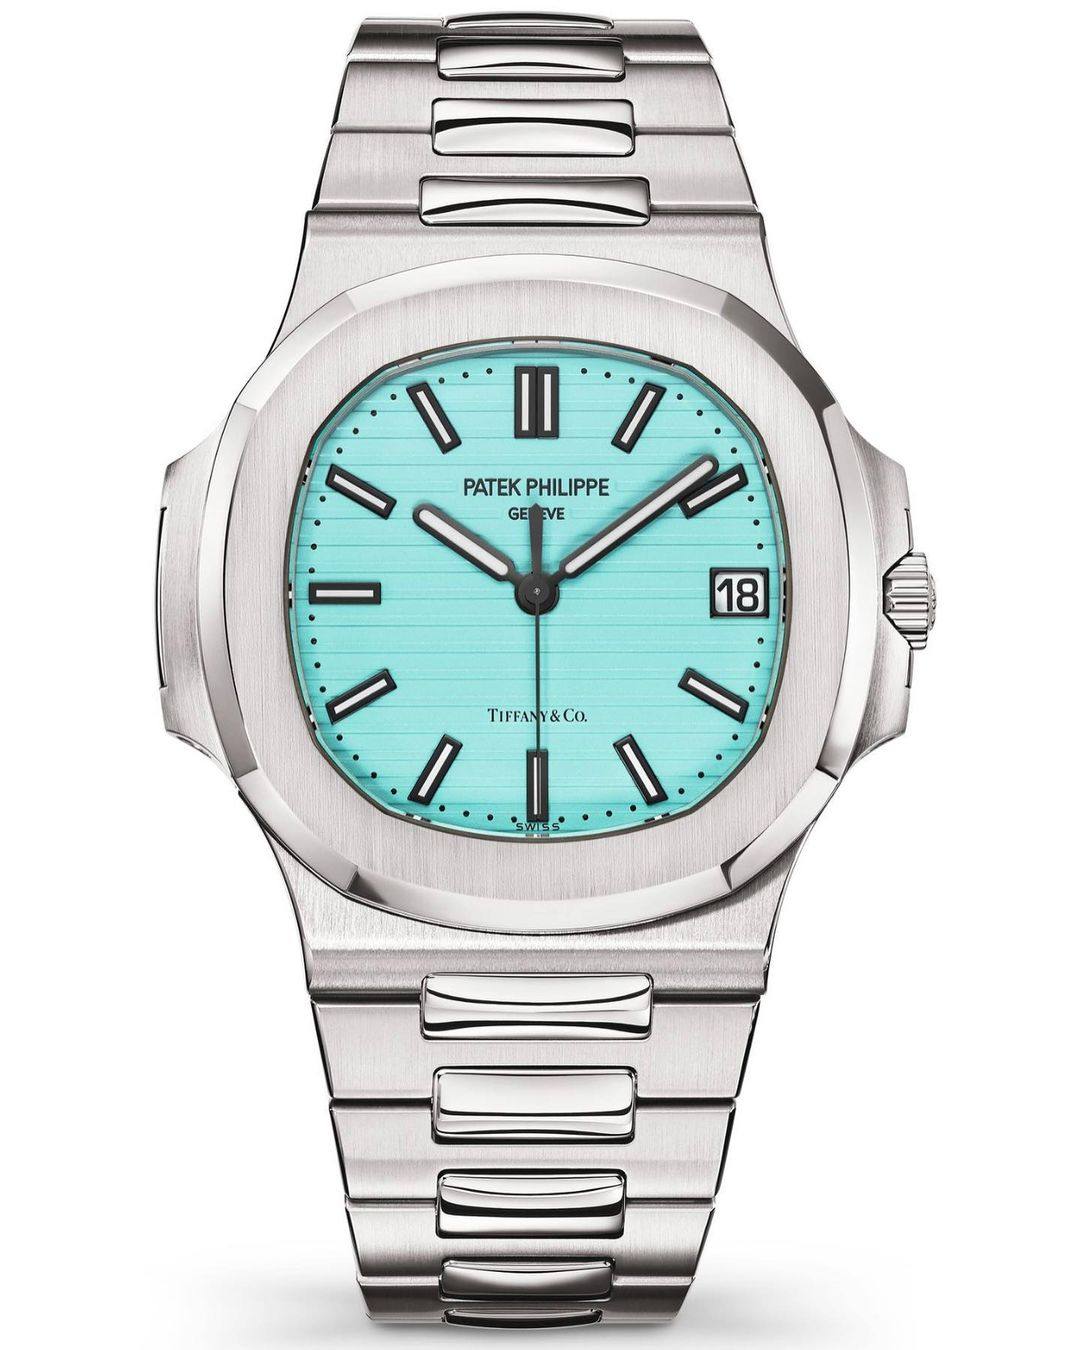 One last time, with feel: Patek Philippe’s discontinued Nautilus 5711 has been revived for a one-off anniversary collaboration with Tiffany & Co., limited to a run of 170 and priced at US$52,635. Photo: Tiffany & Co.